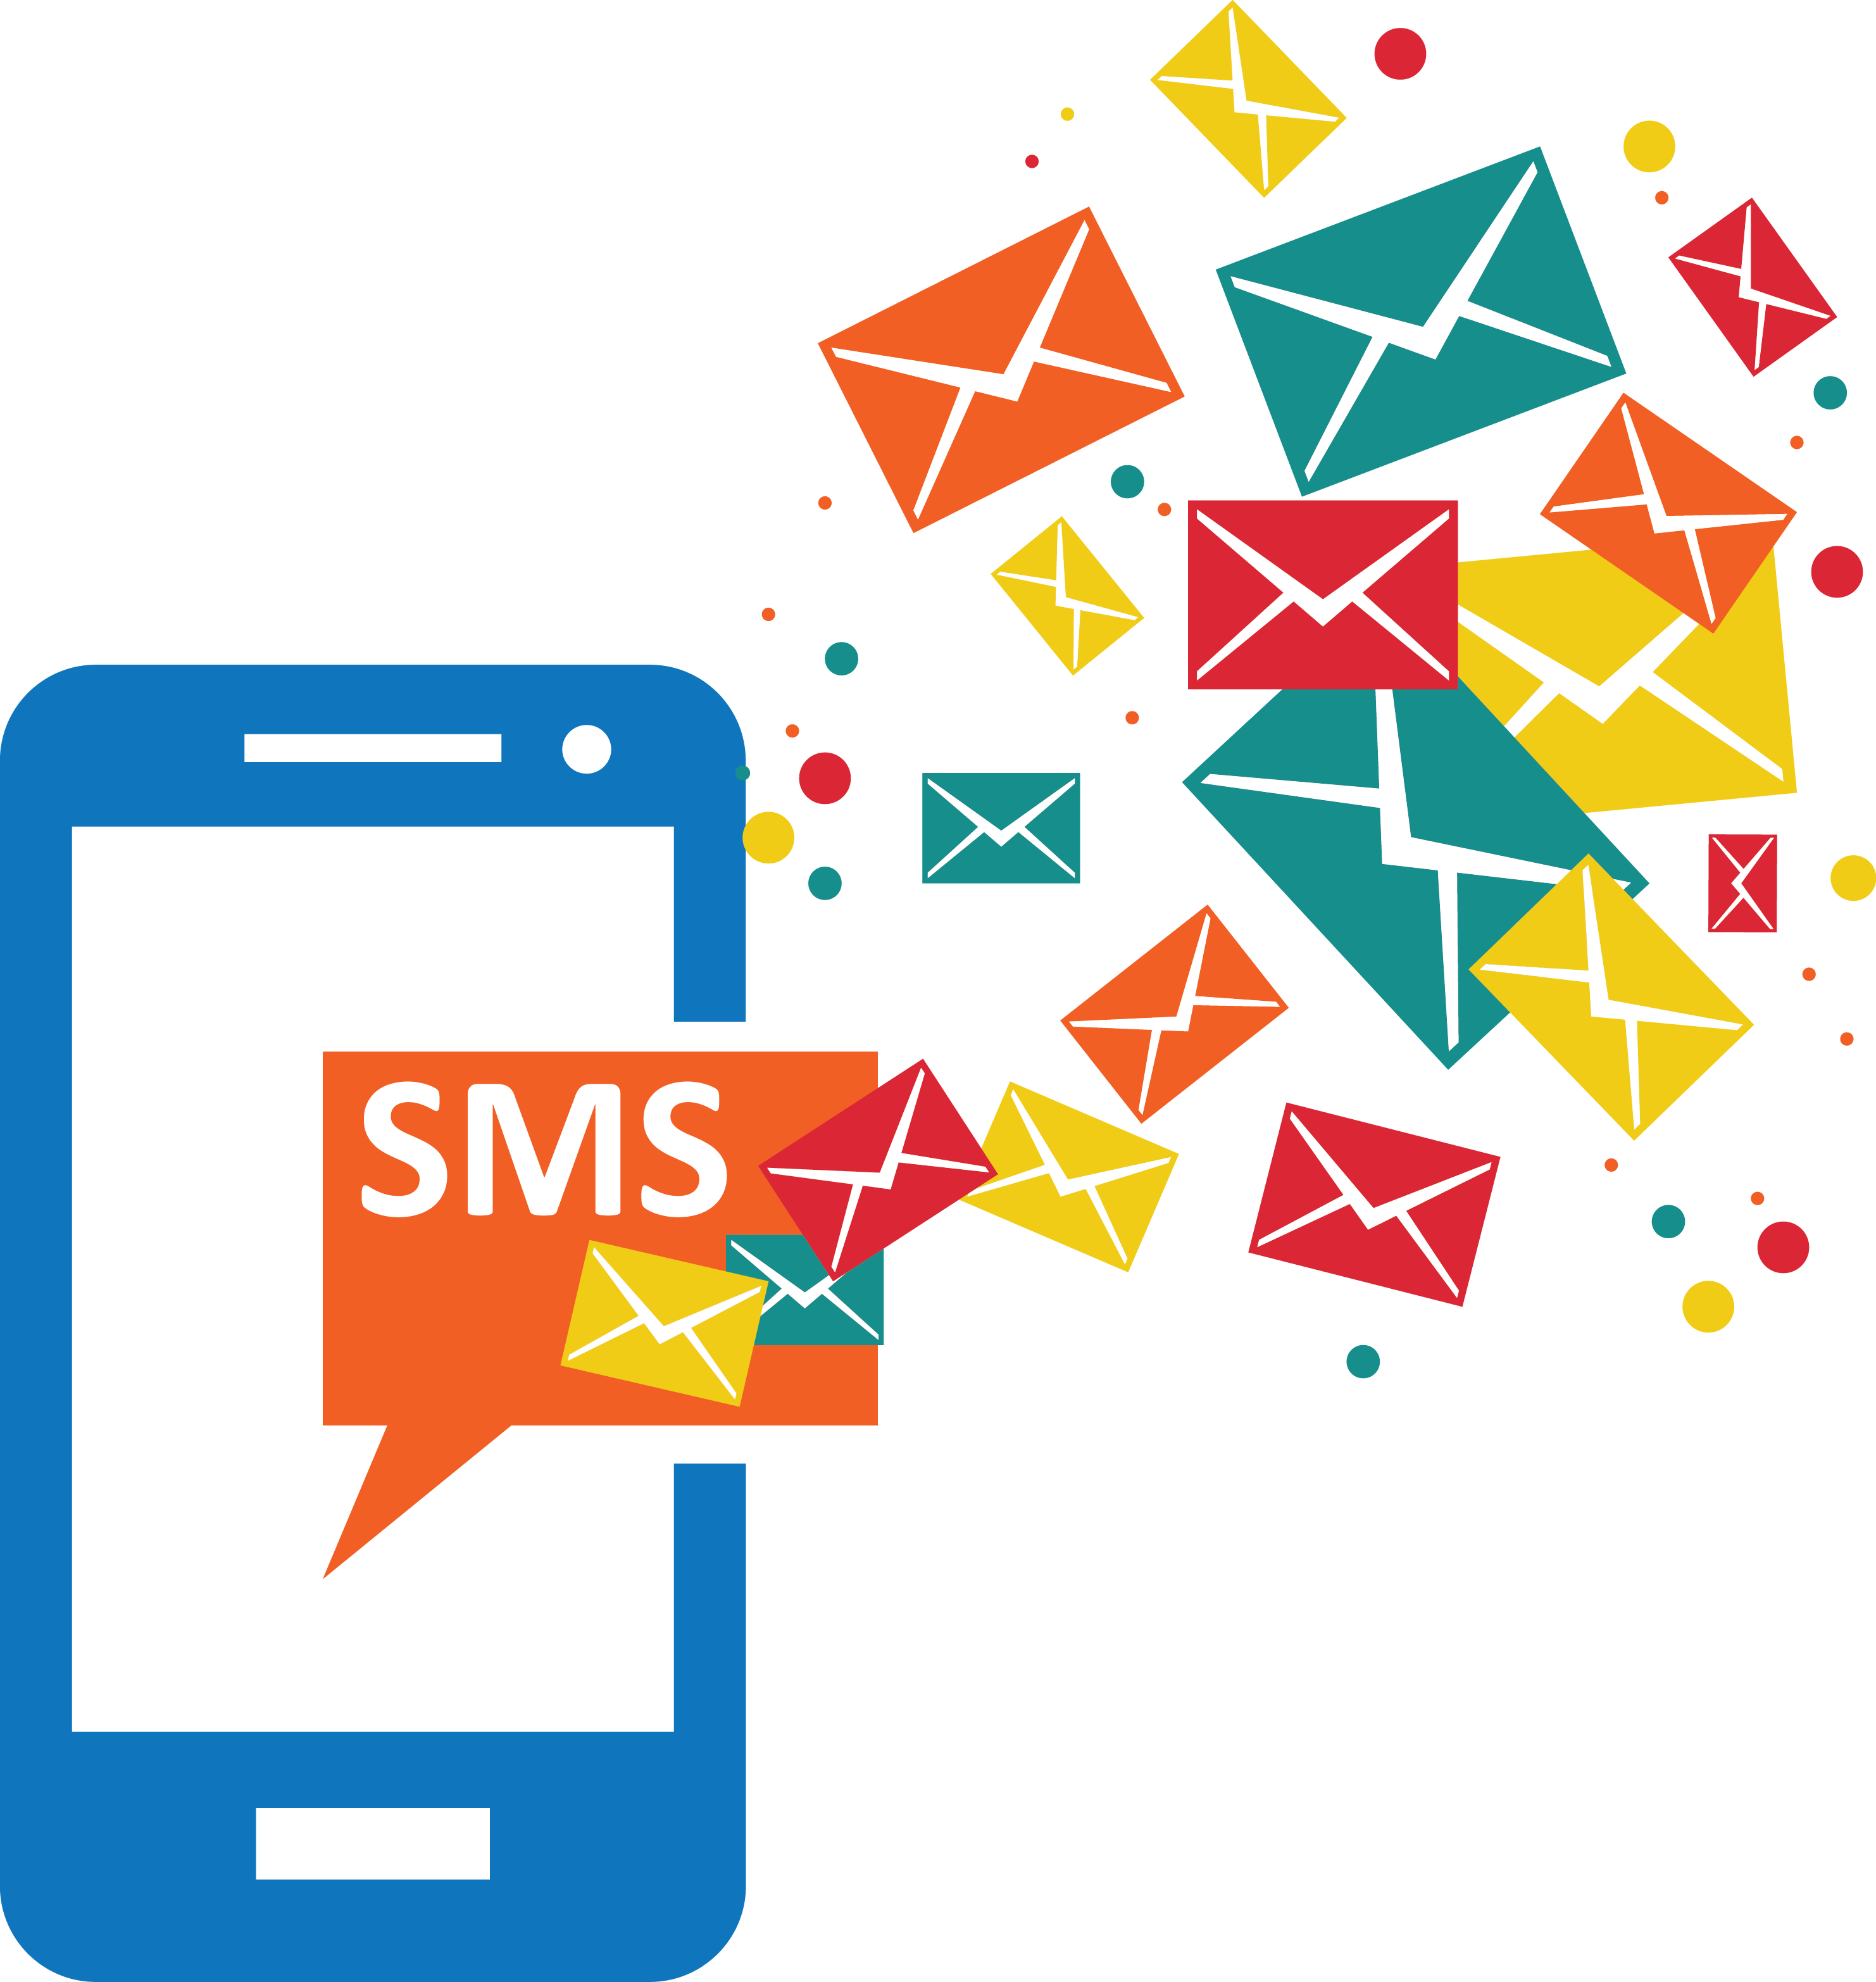 SMS Solutions for Business to Boost Engagement and Revenue – UITRENDS